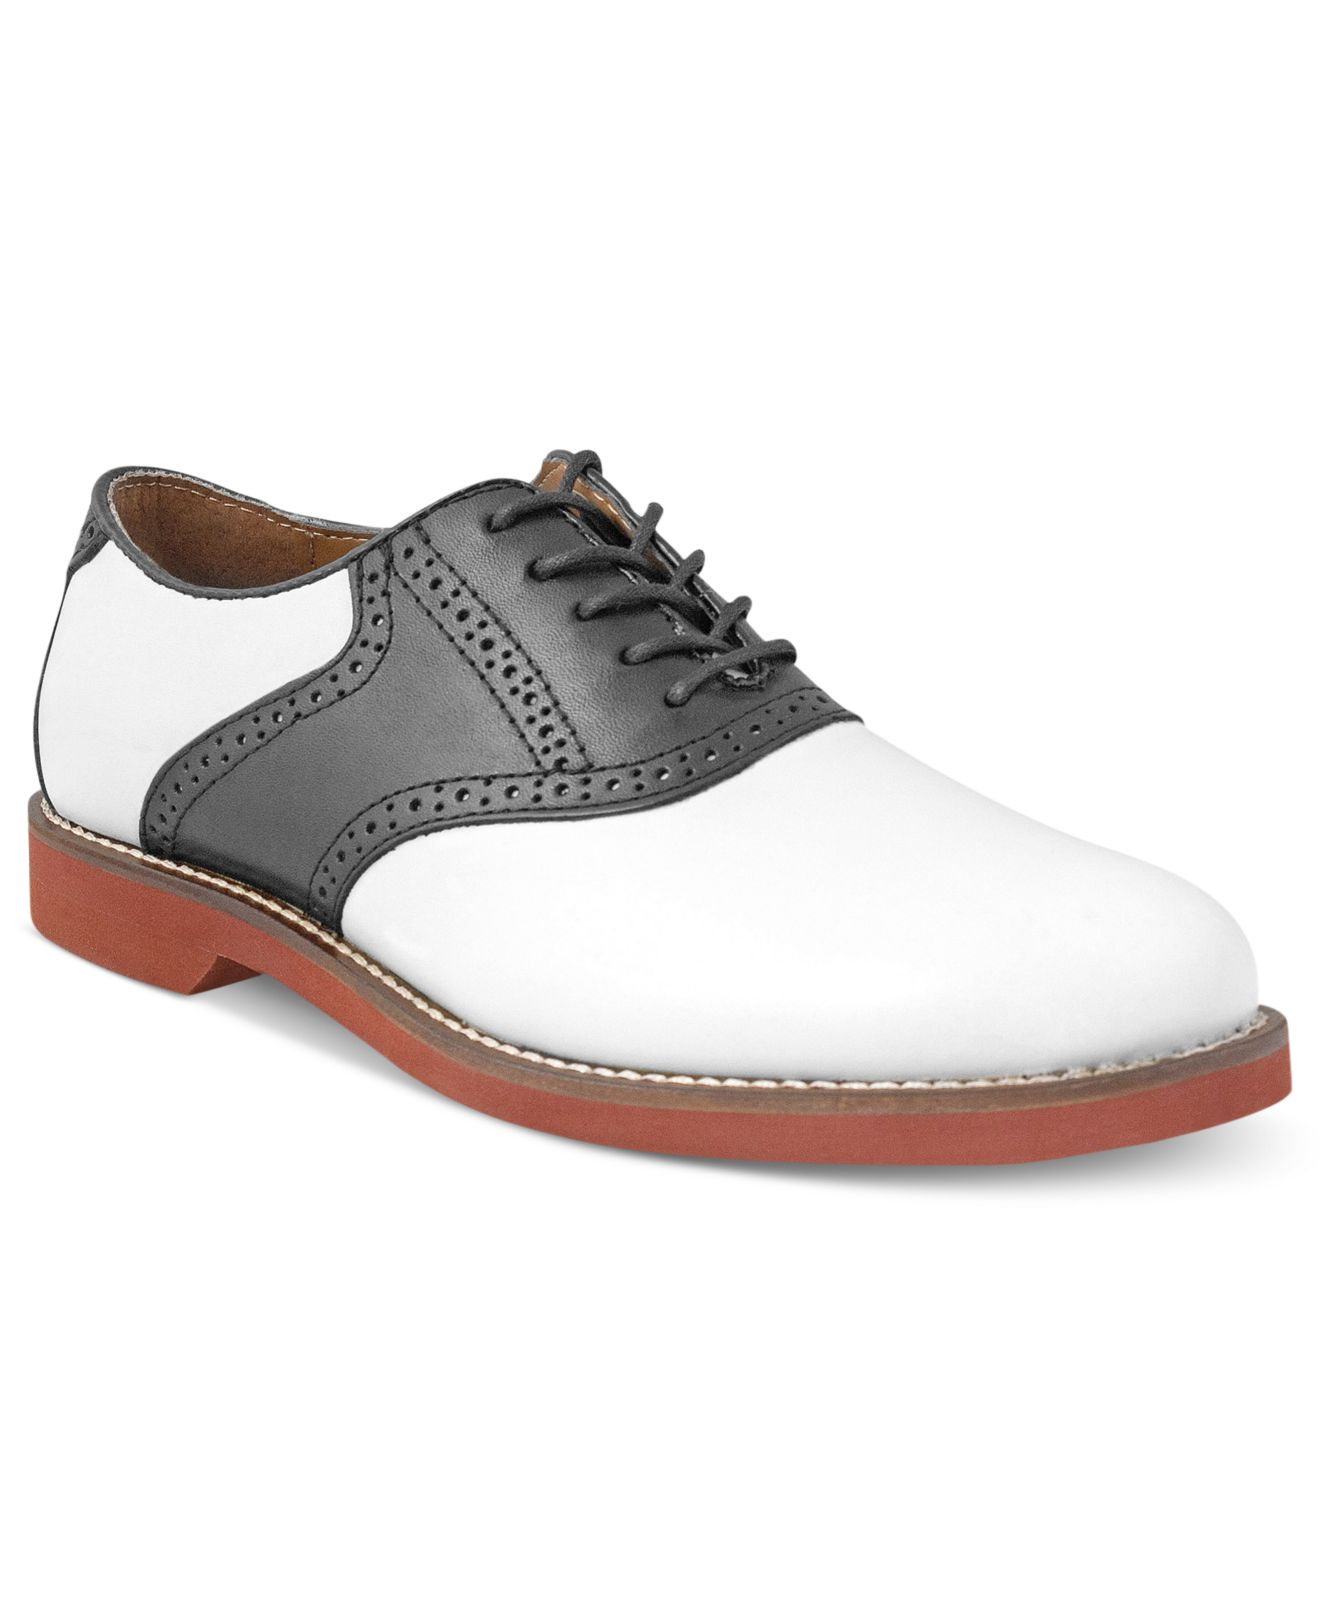 bass black and white saddle oxfords